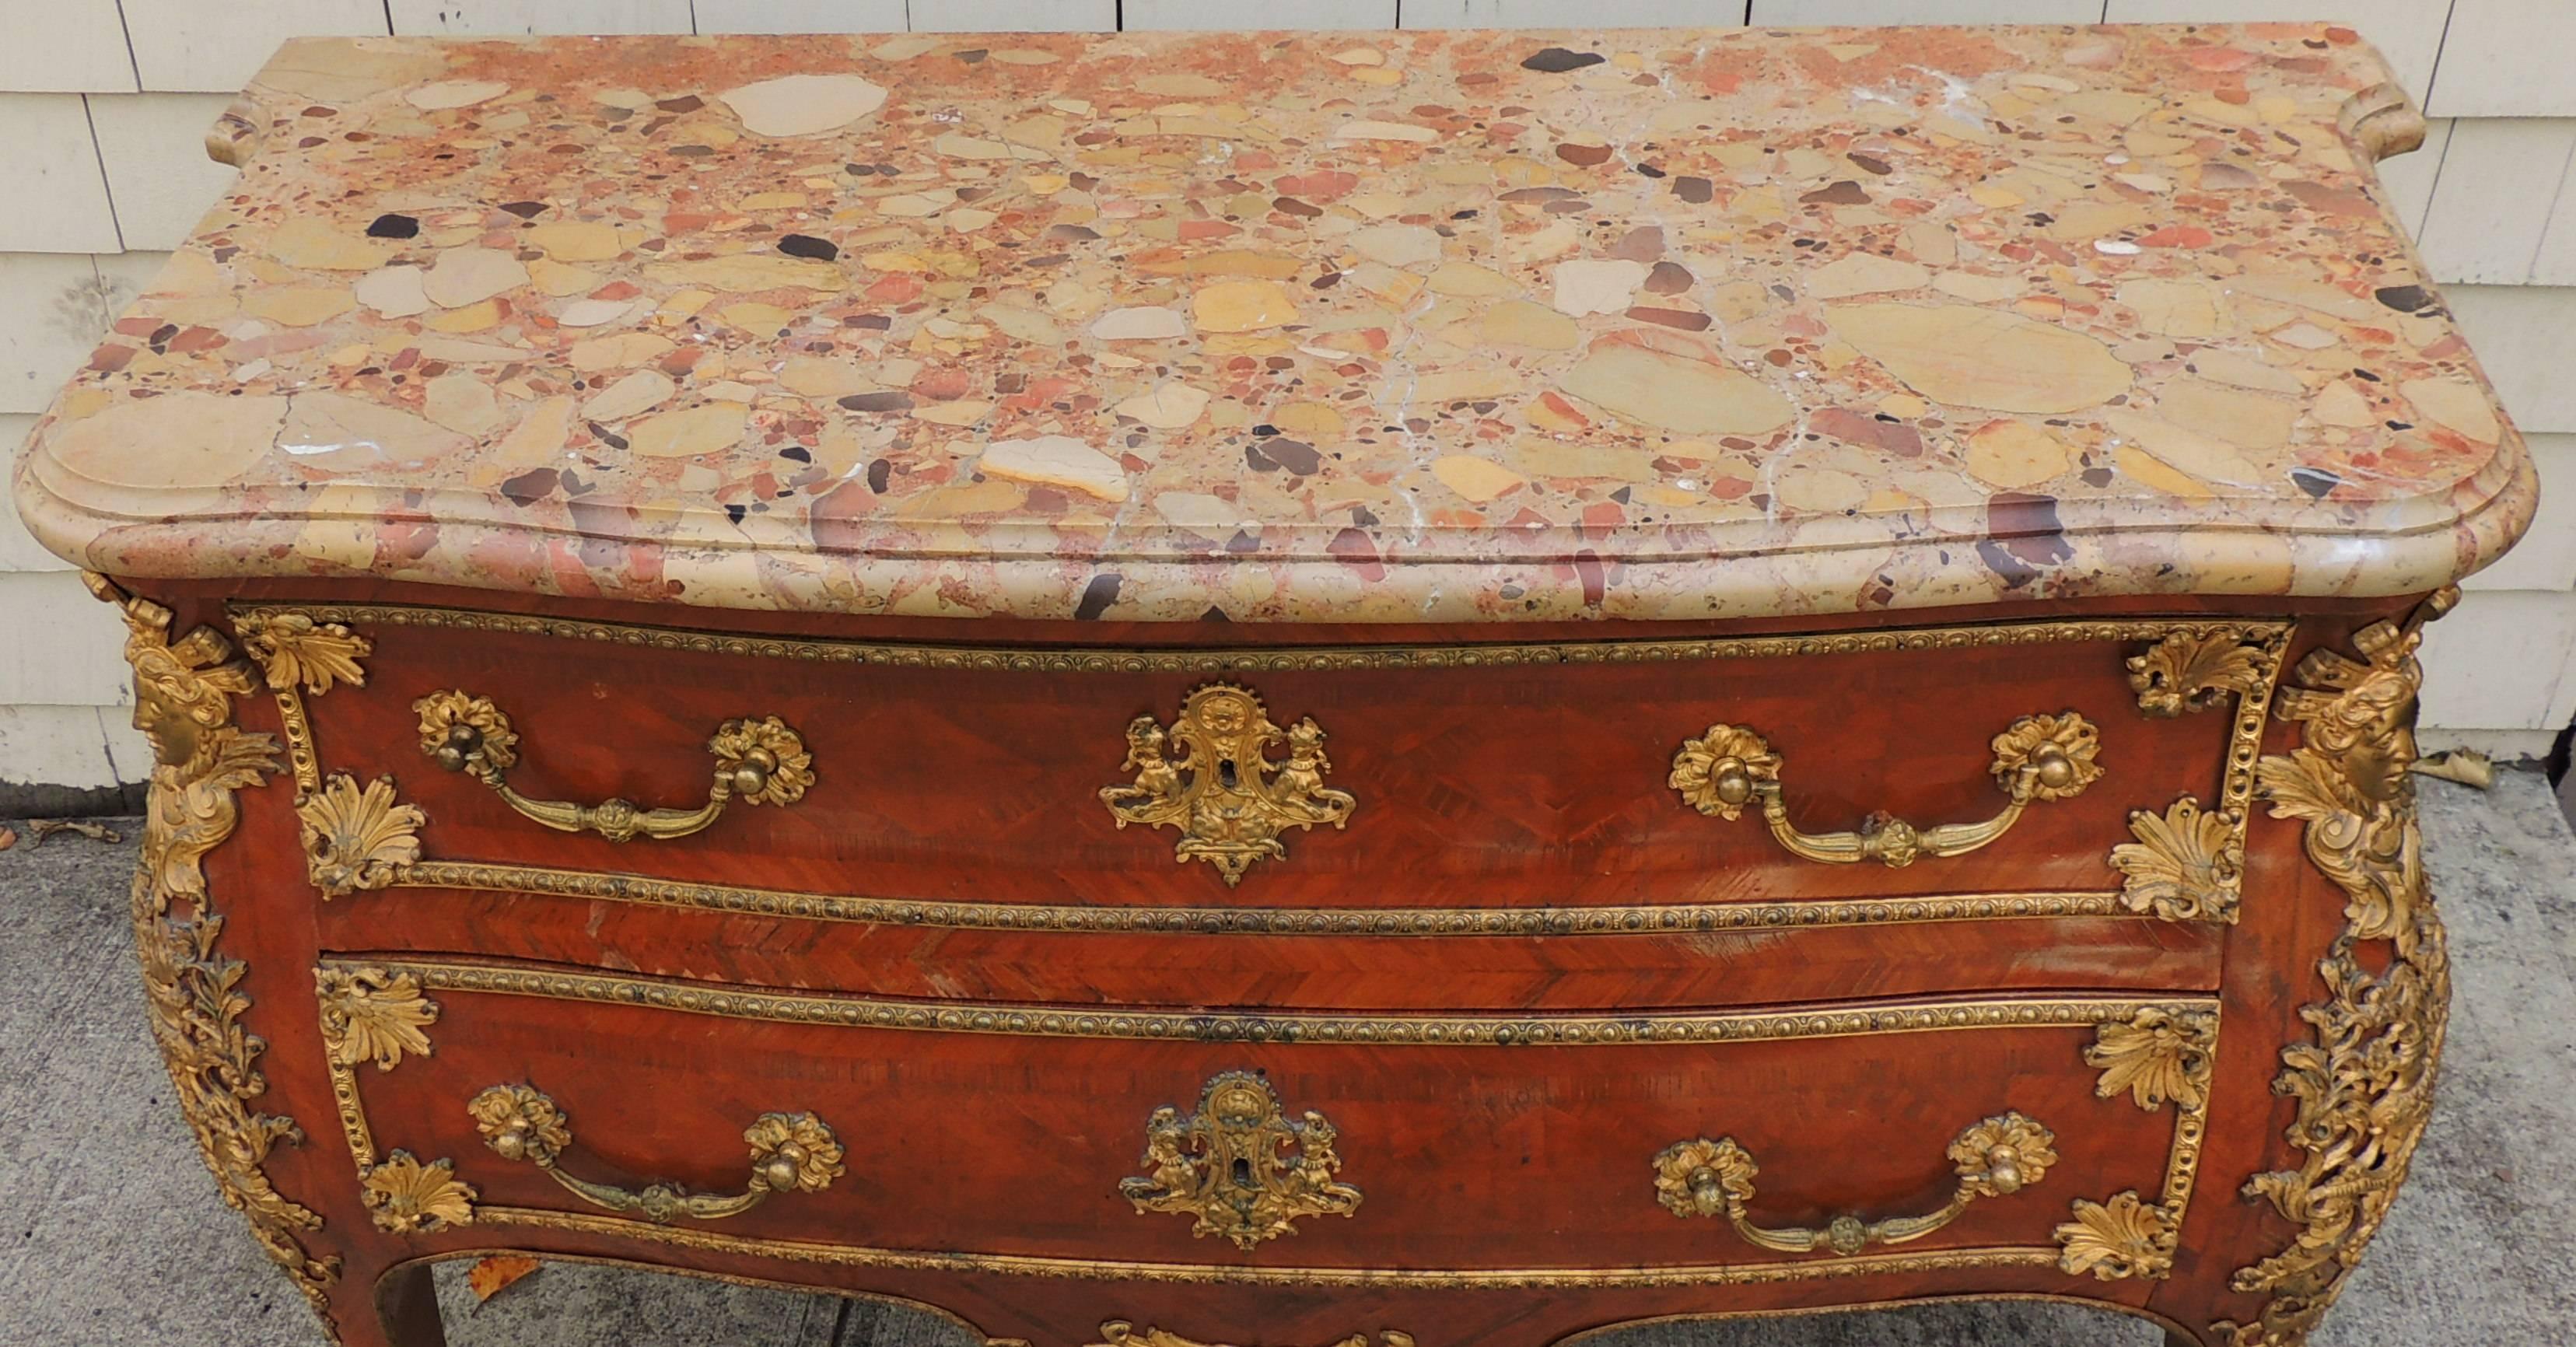 Wonderful French 19th Century Louis XV Ormolu Bronze-Mounted Marble-Top Commode In Good Condition For Sale In Roslyn, NY